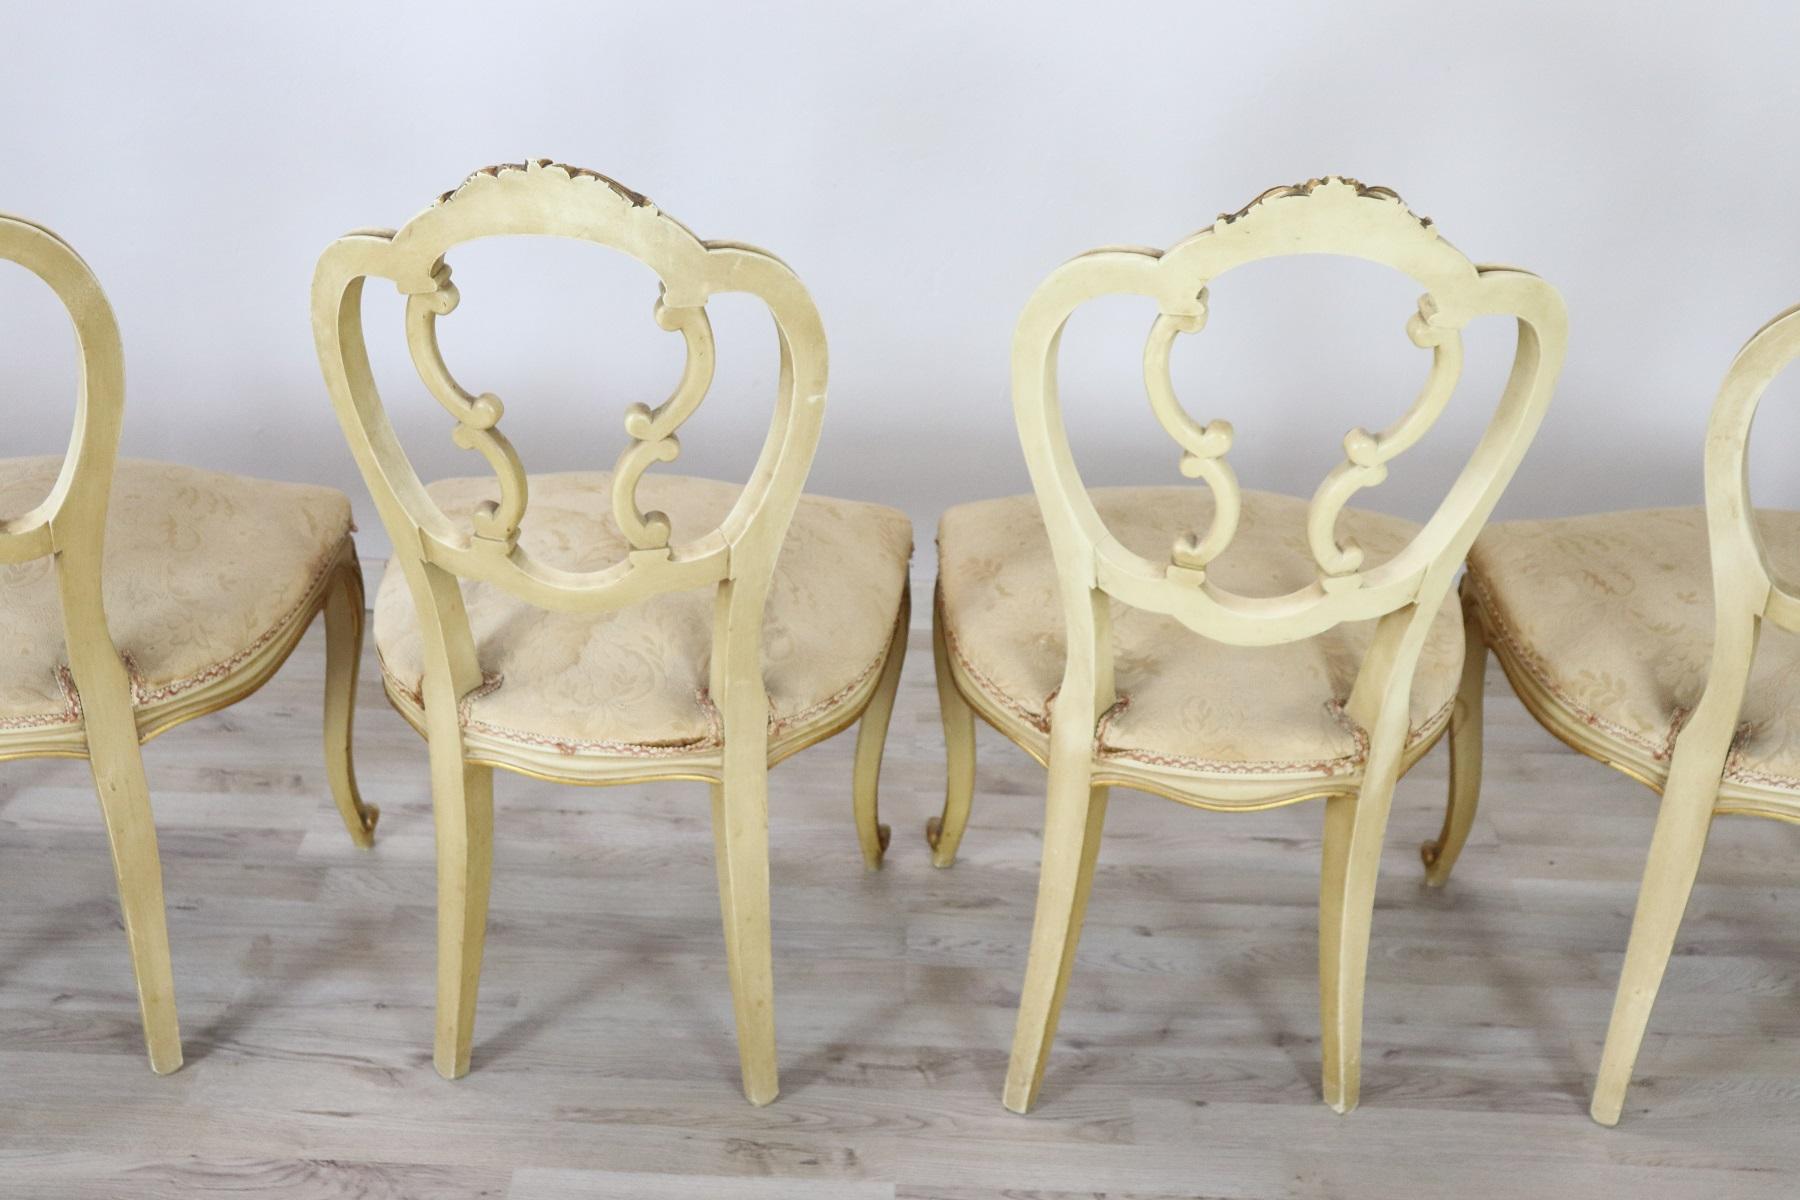 20th Century Italian Baroque Style Carved Lacquered Gilded Wood Six Chairs 1